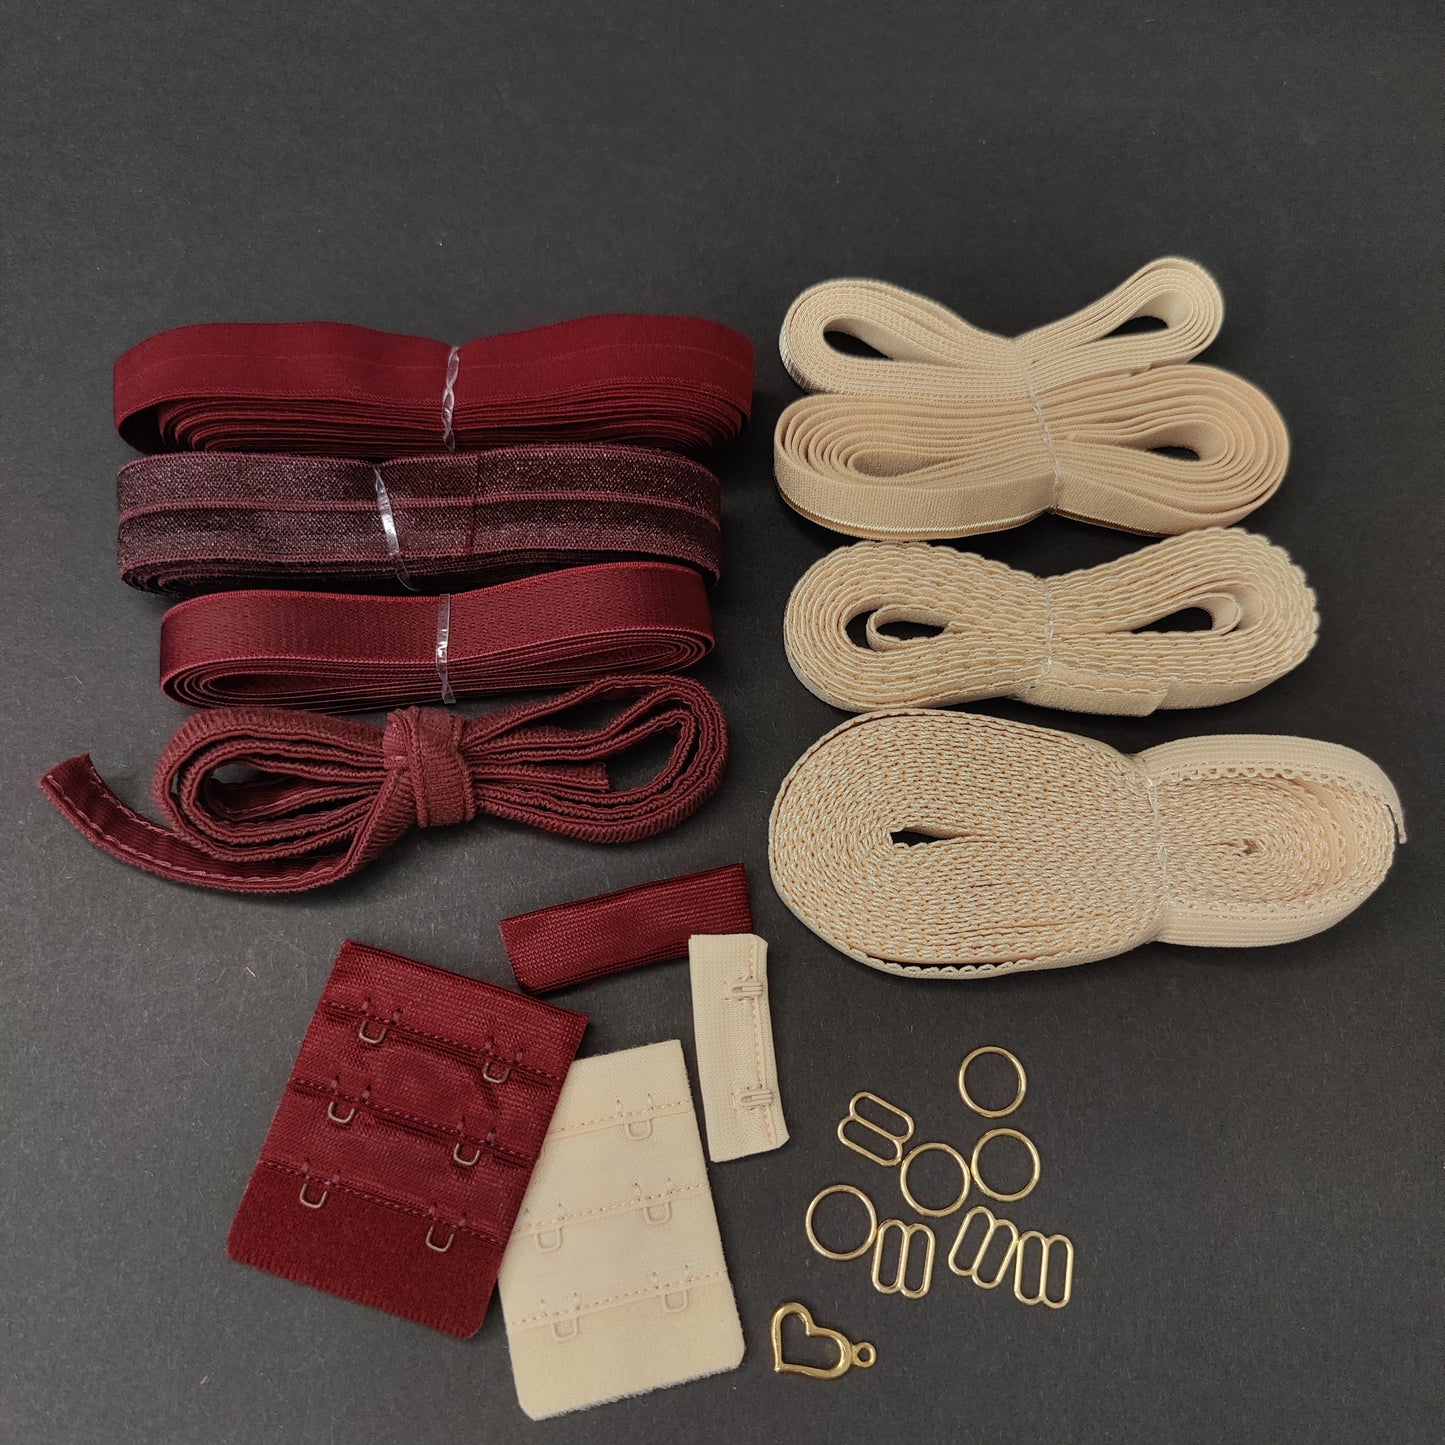 Large sewing set for bra and panties or sewing package with <tc>lace</tc>, microfiber, Powernet in bordeaux on gold IDnsx1